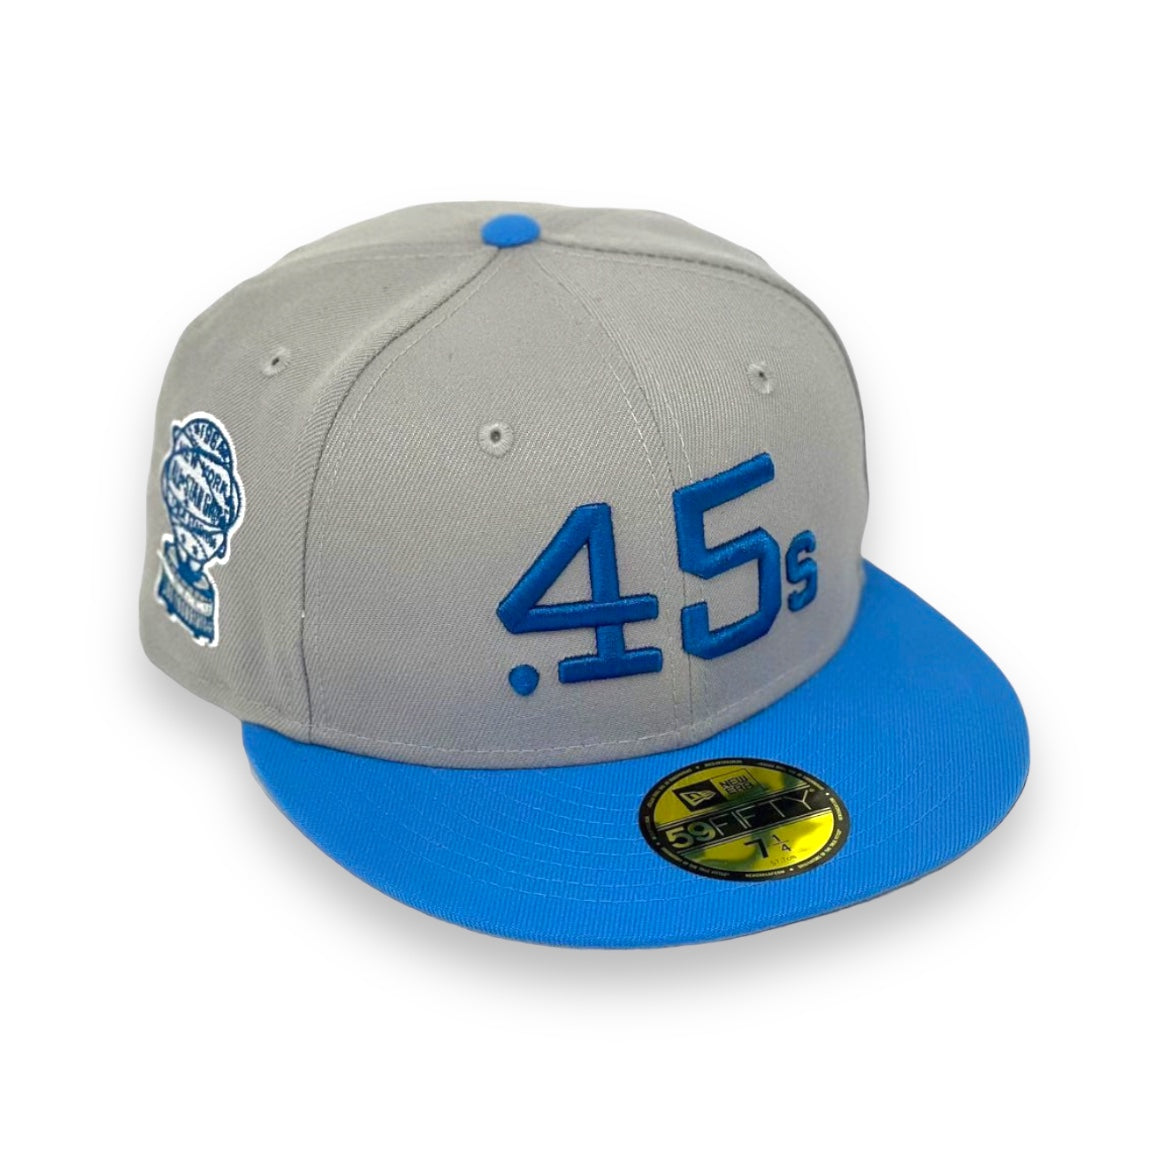 COLT 45'S (GREY) (1964 ALLSTARGAME) NEW ERA 59FIFTY FITTED